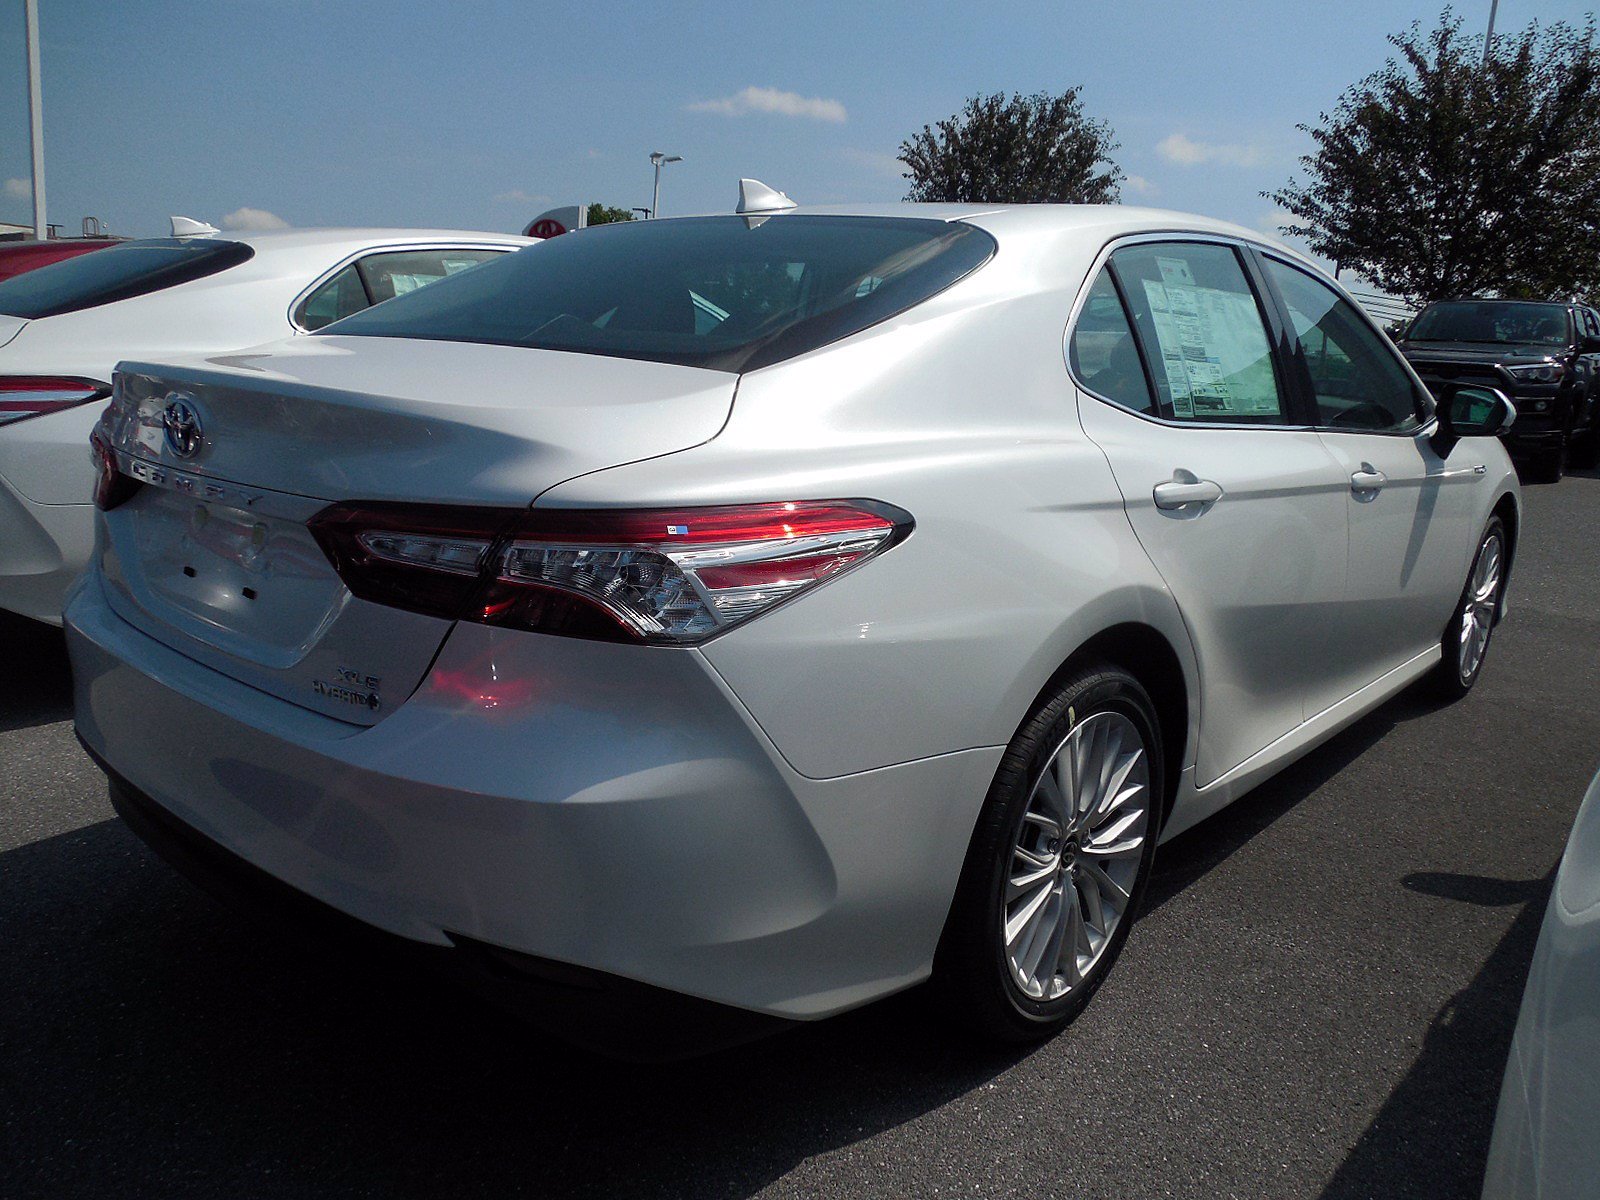 New 2020 Toyota Camry Hybrid XLE 4dr Car in East Petersburg #15018 ...
